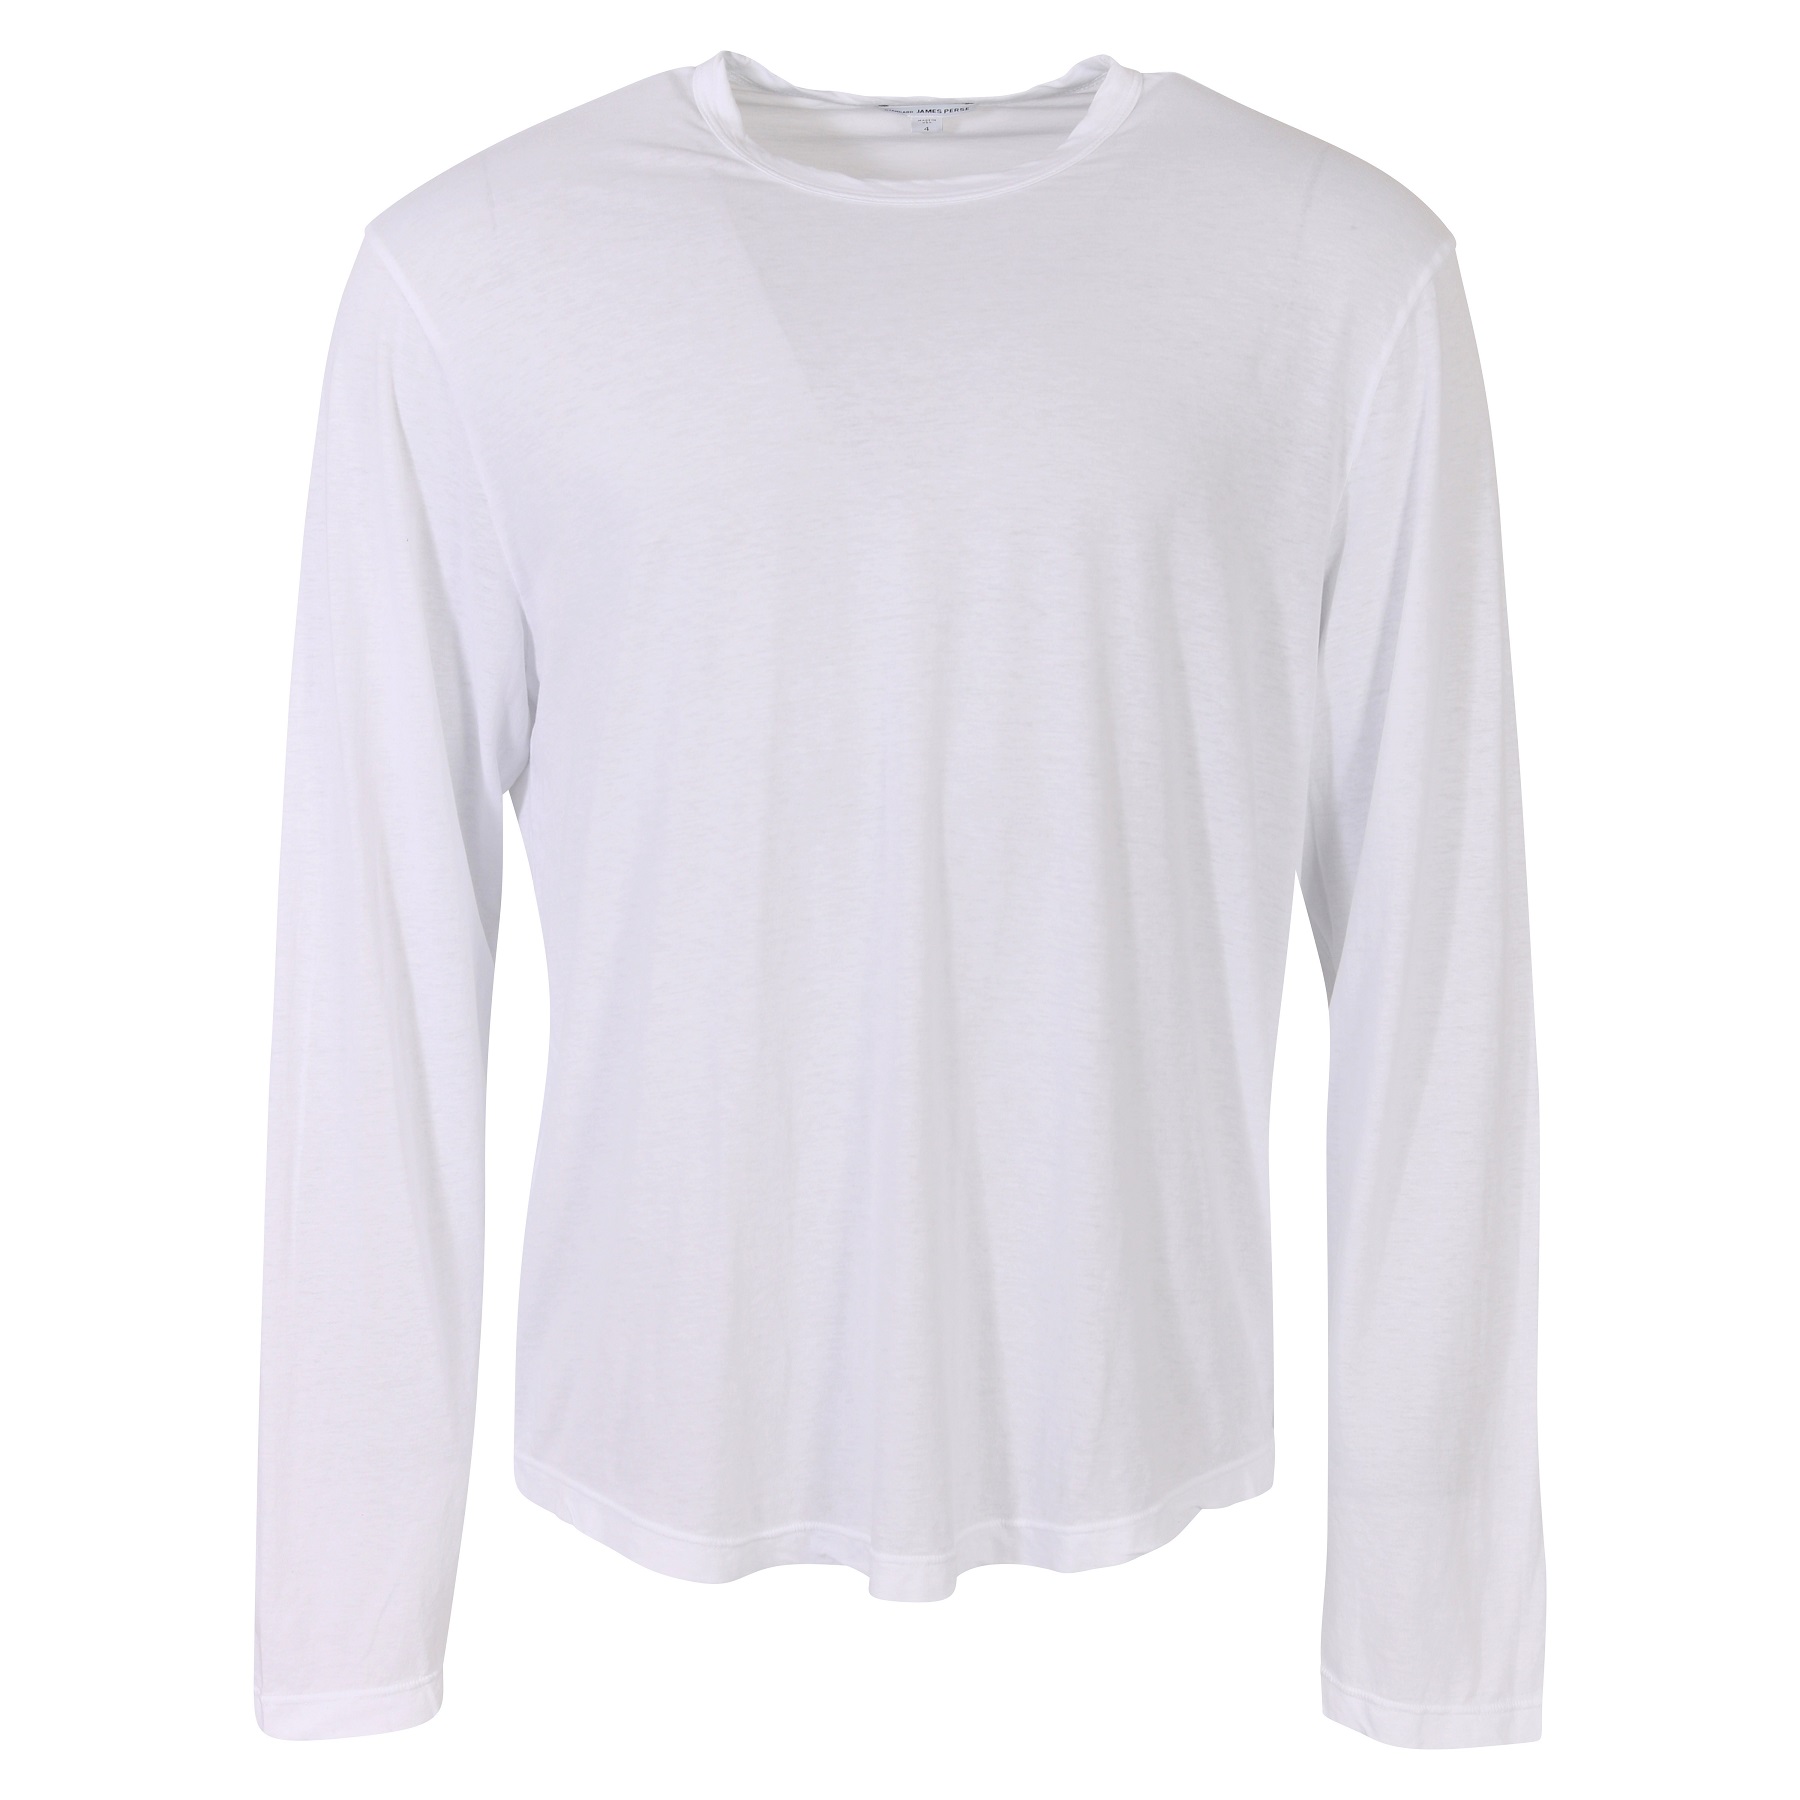 James Perse Clear Jersey Longsleeve Crewneck White